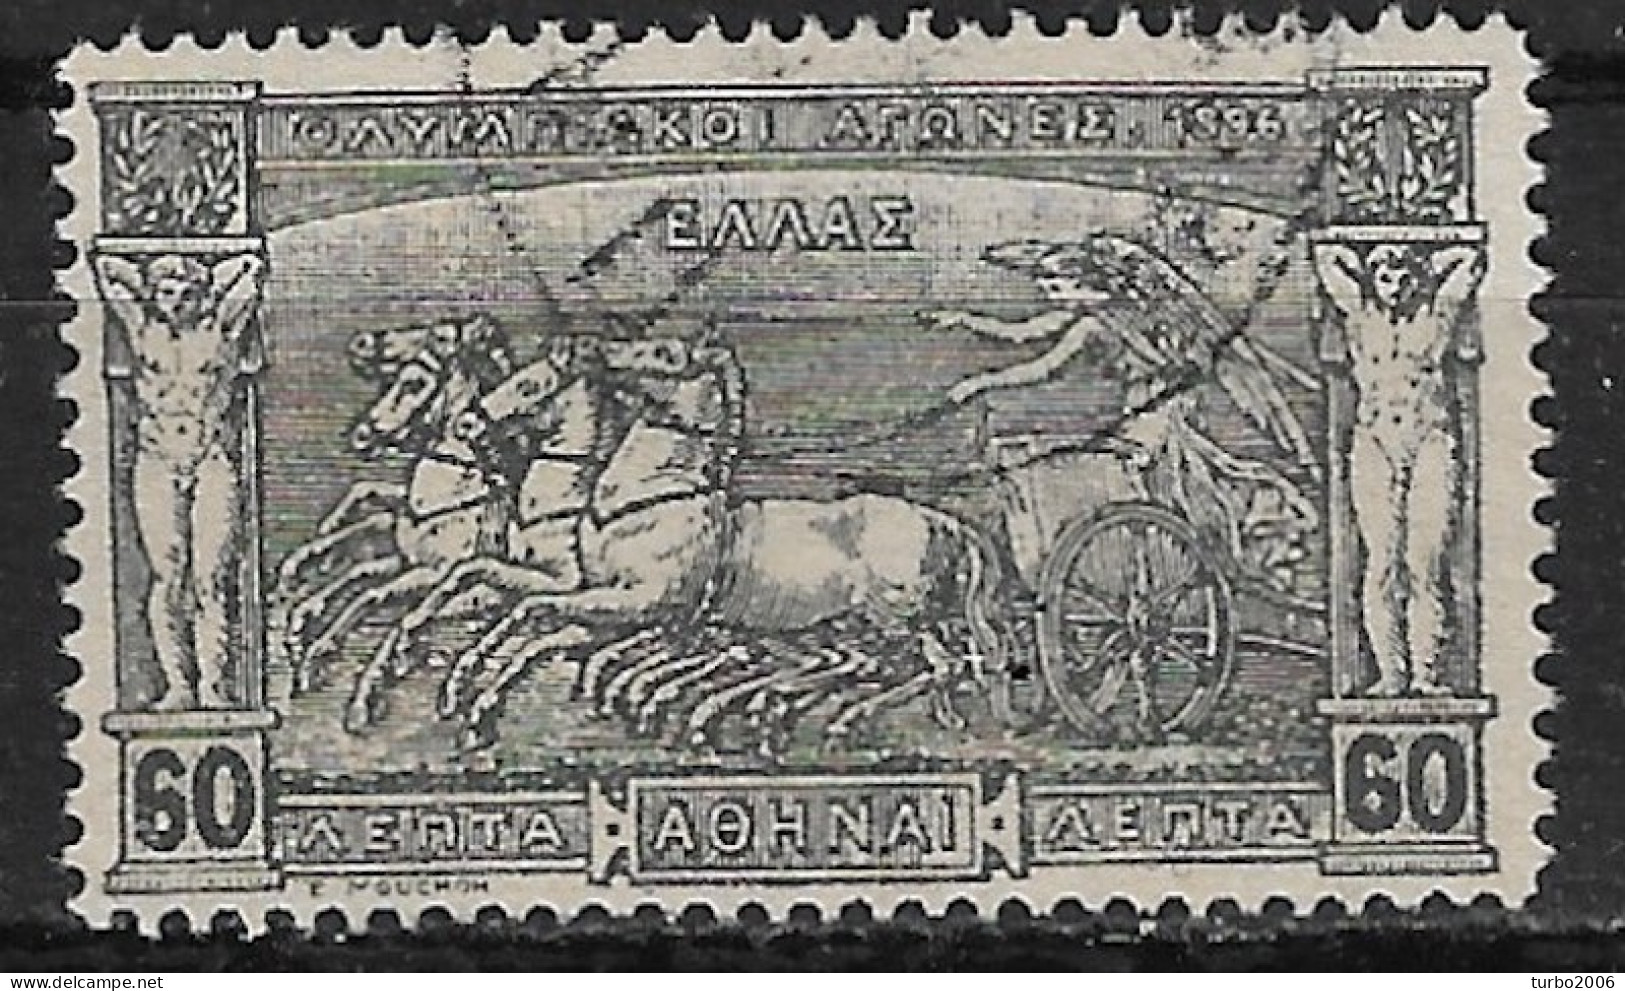 GREECE 1896 First Olympic Games 60 Lepta Black Vl. 140 Interesting Classic Forgery With Fake Cancellation ΠΑΤΡΑΙ - Usati